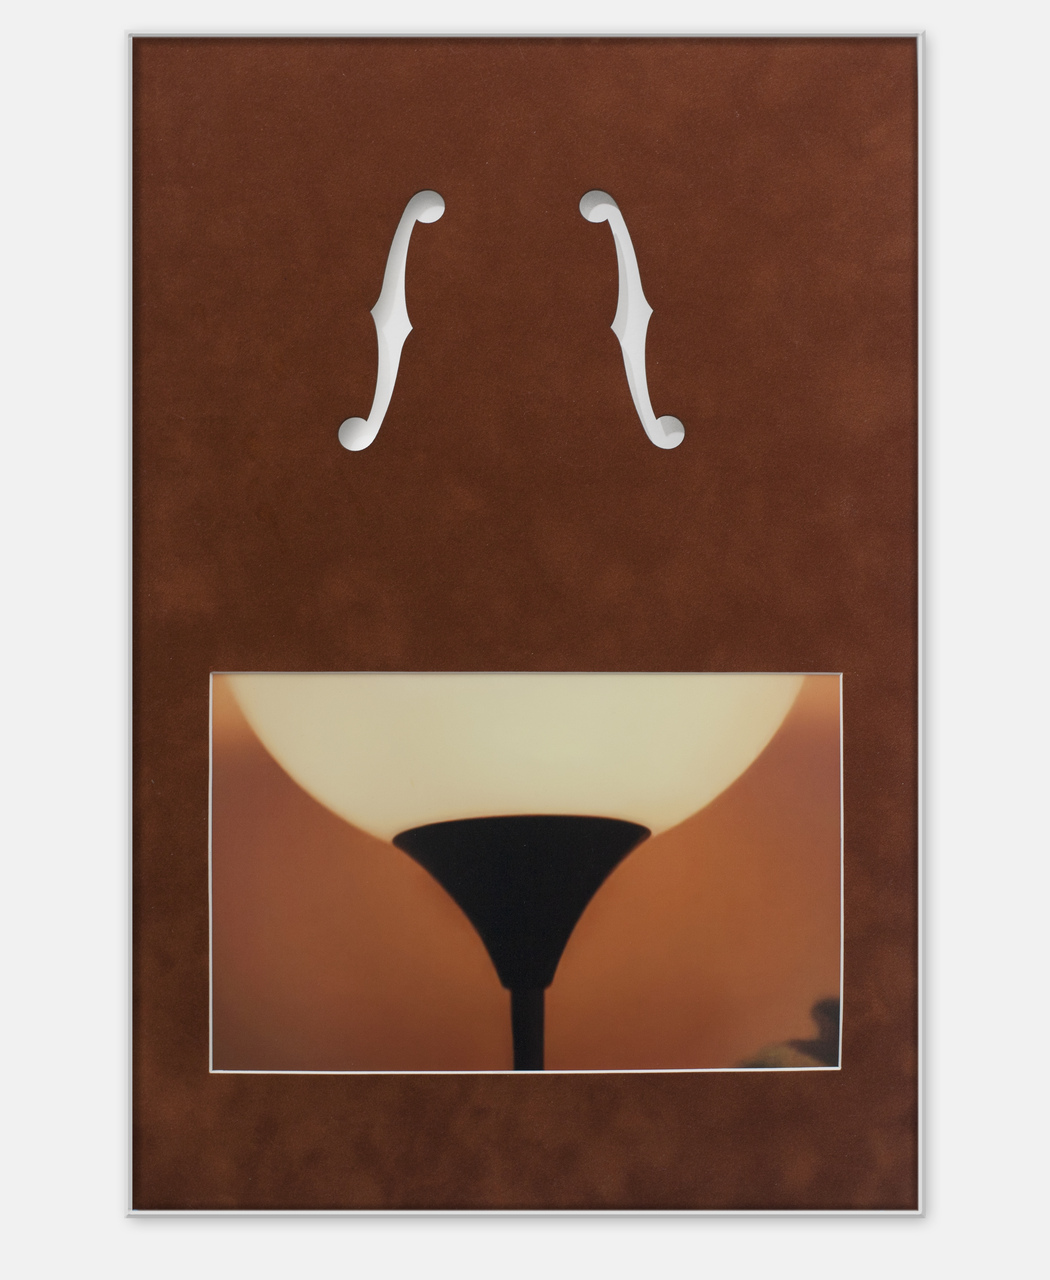 36.Shen_F-Hole (Dirty Lamp)_2015_Digital print, sueded matboard, frame_18 x 12 inches_Courtesy of Hester